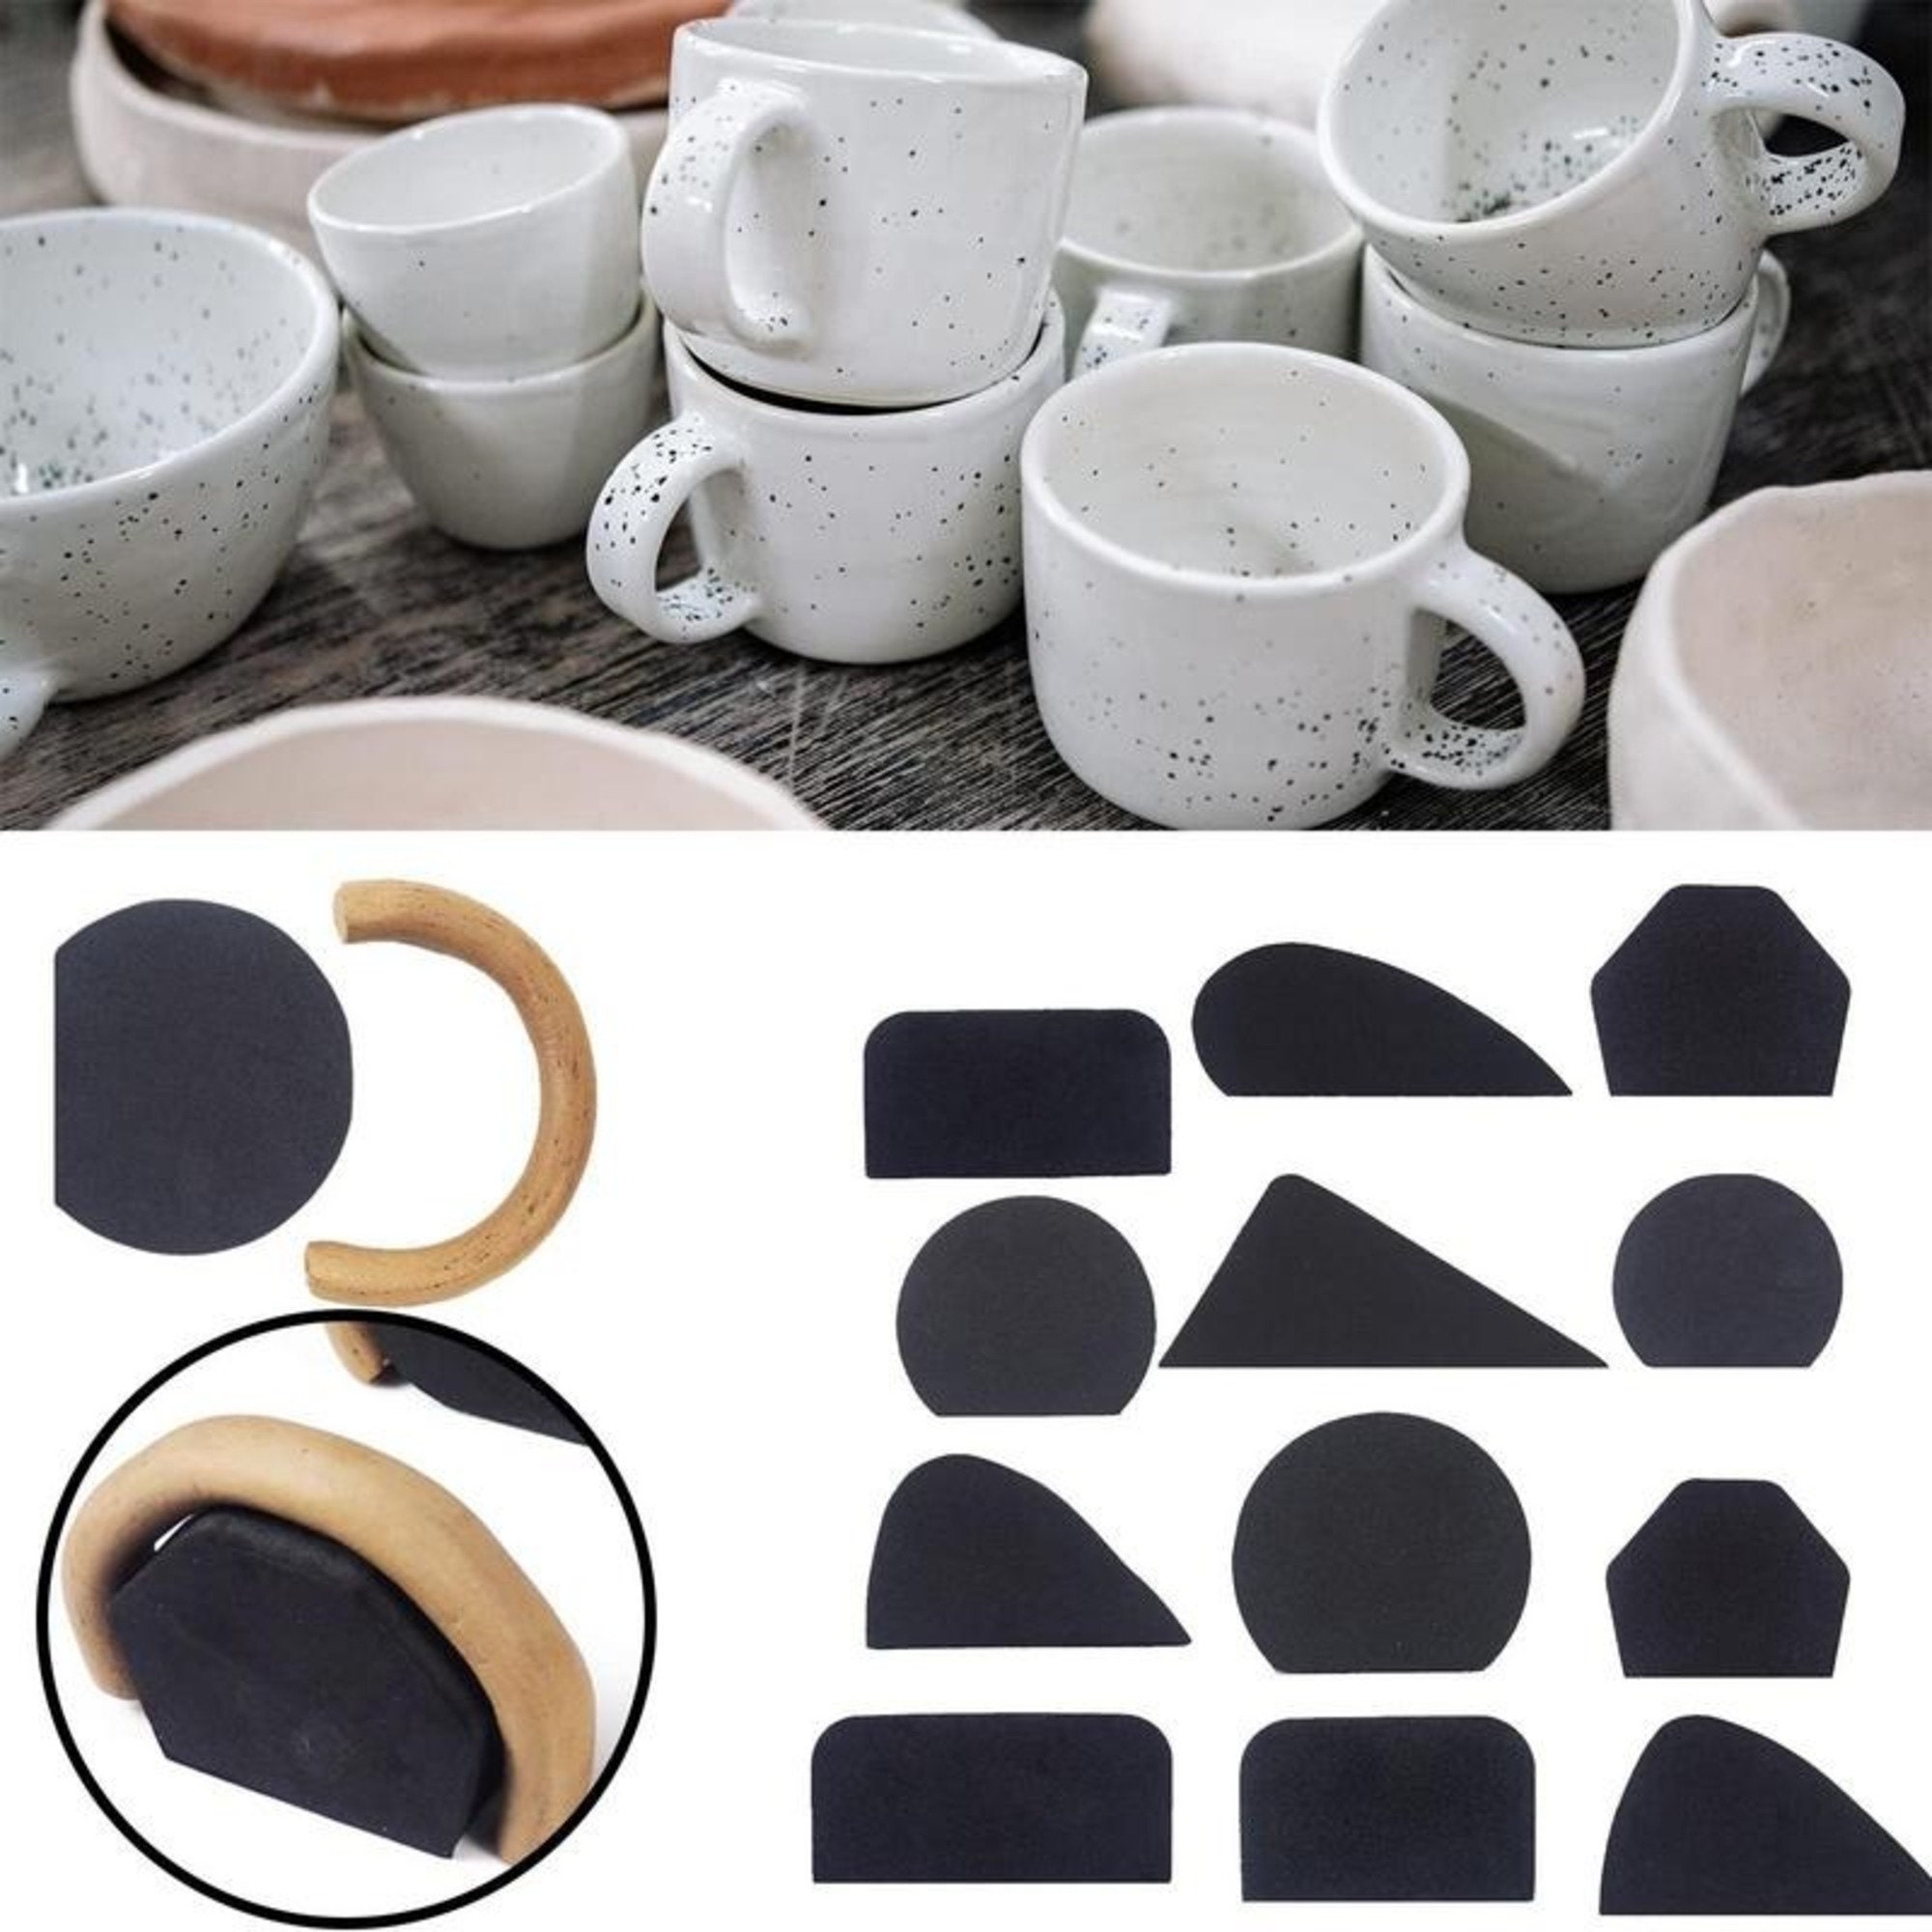 12Pcs Pottery Mug Handle Molds for Clay DIY Pottery Mug Handle Molds Tool  for Different Shapes and Sizes for Pottery Clay Ceramics Handle Shaping